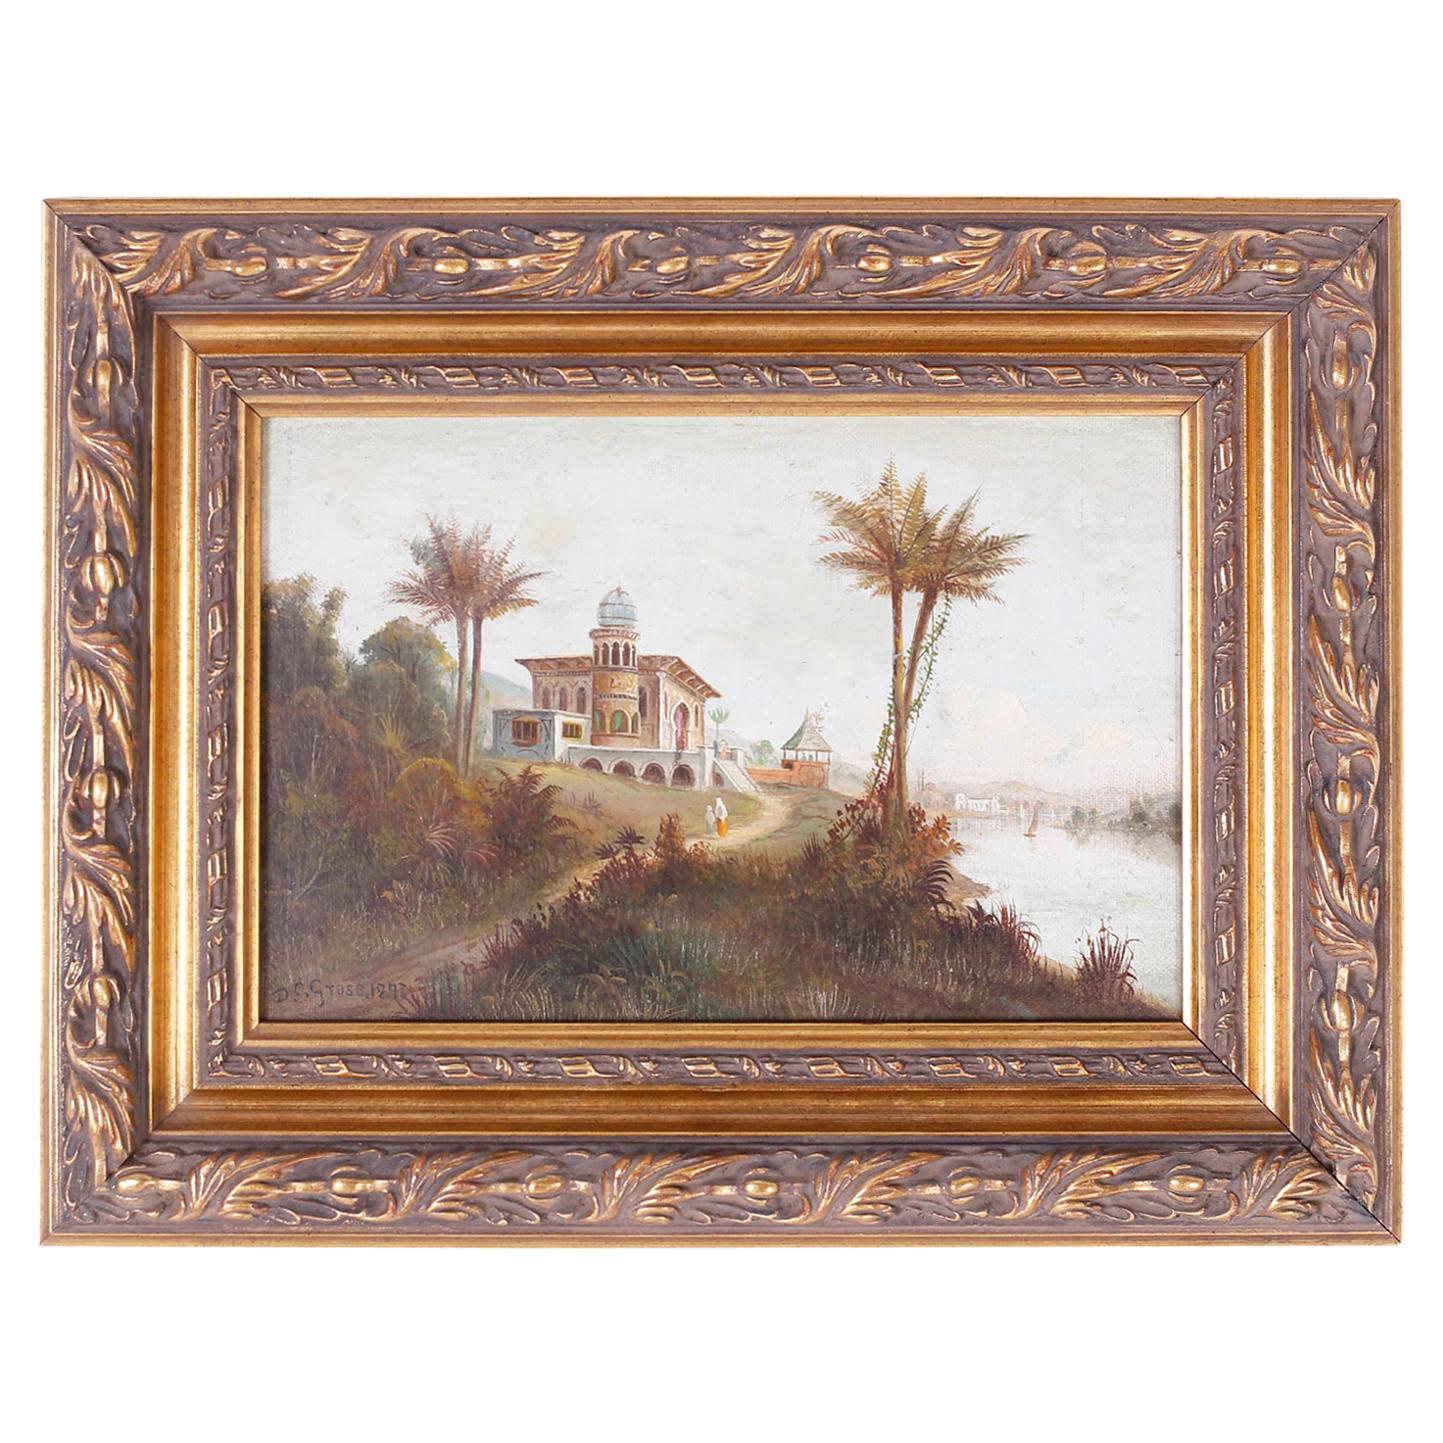 Orientalist Oil Painting on Canvas of an Indian Landscape